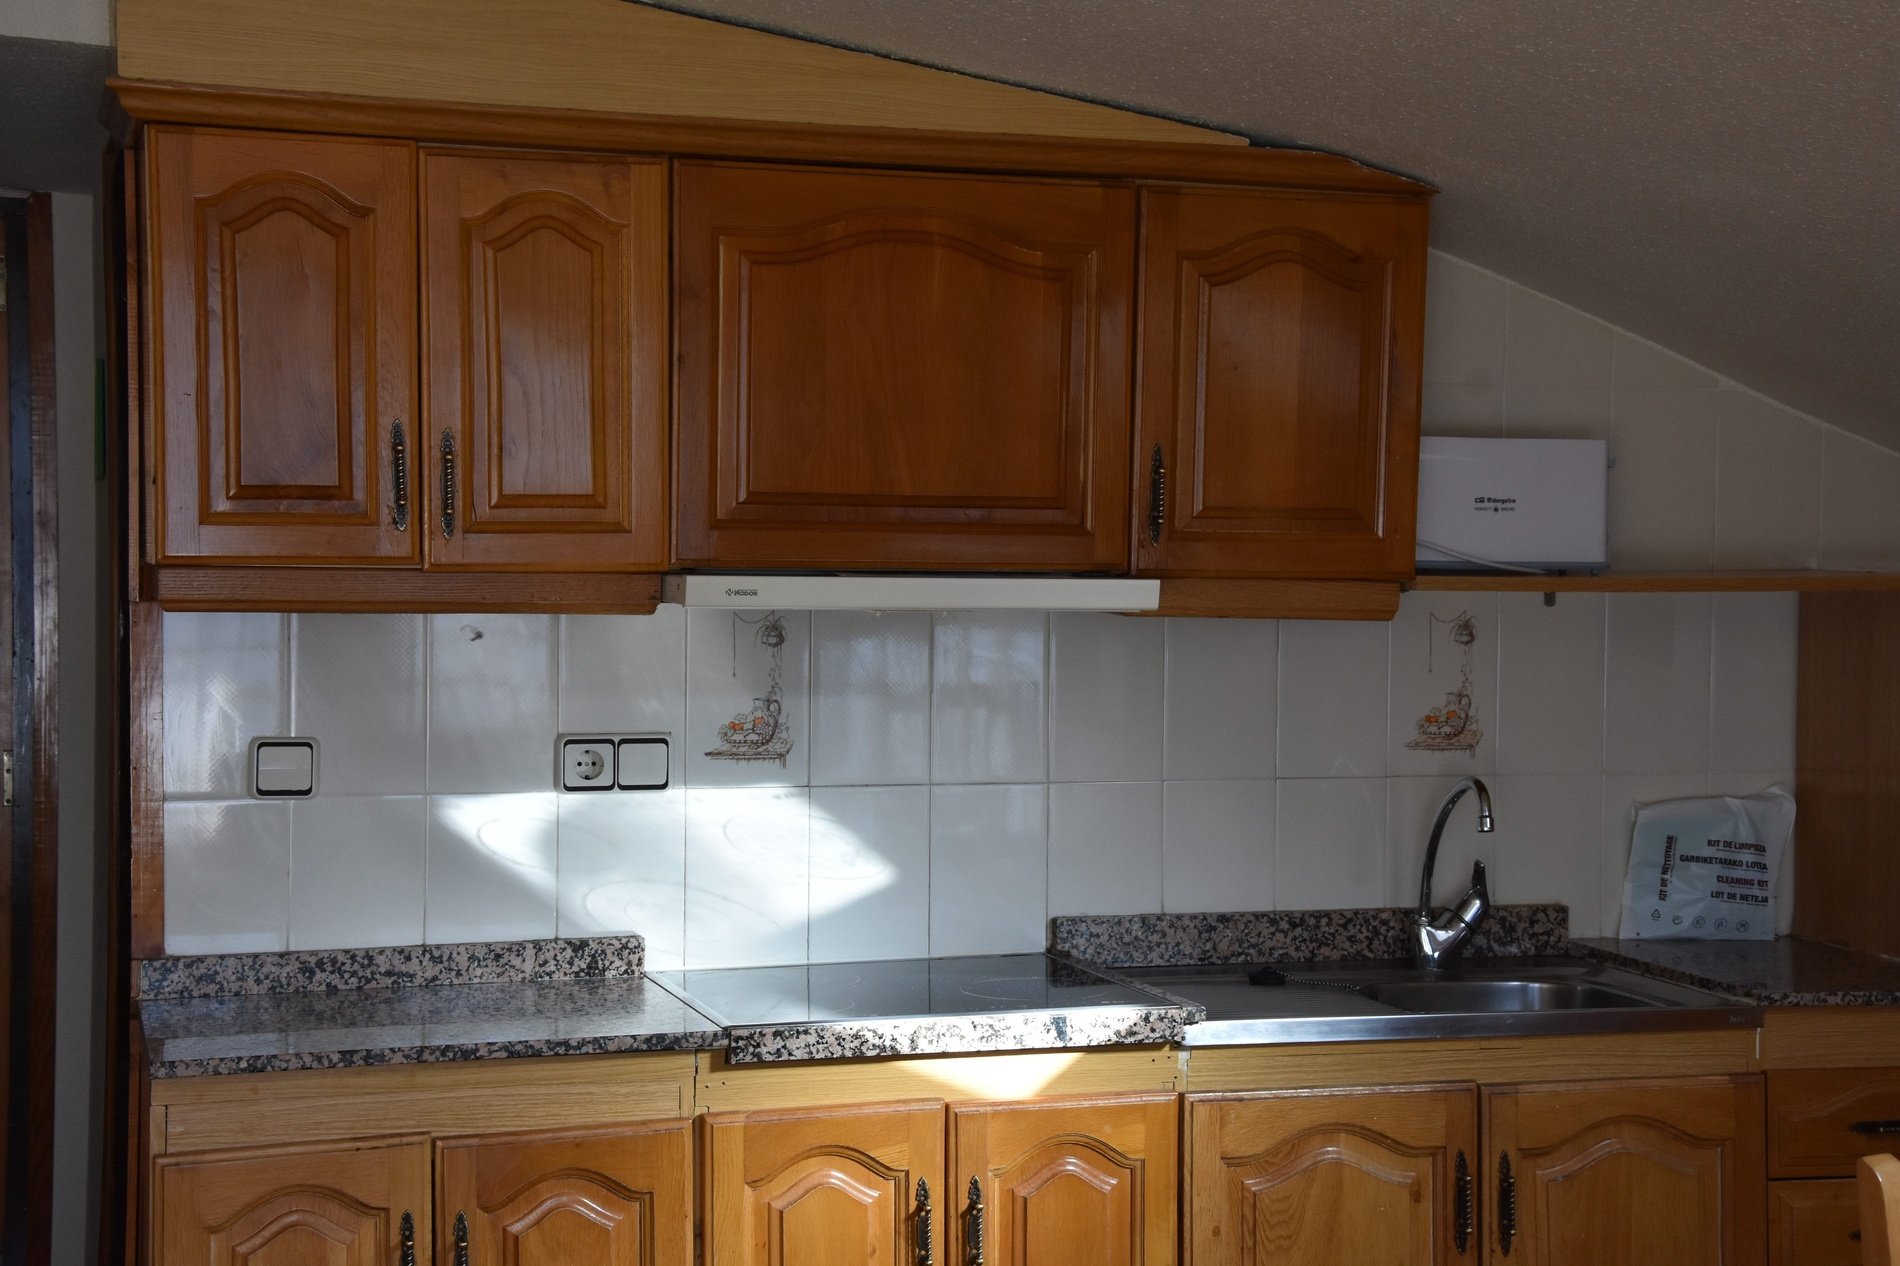 a kitchen with wooden cabinets and a box that says ' siemens ' on it